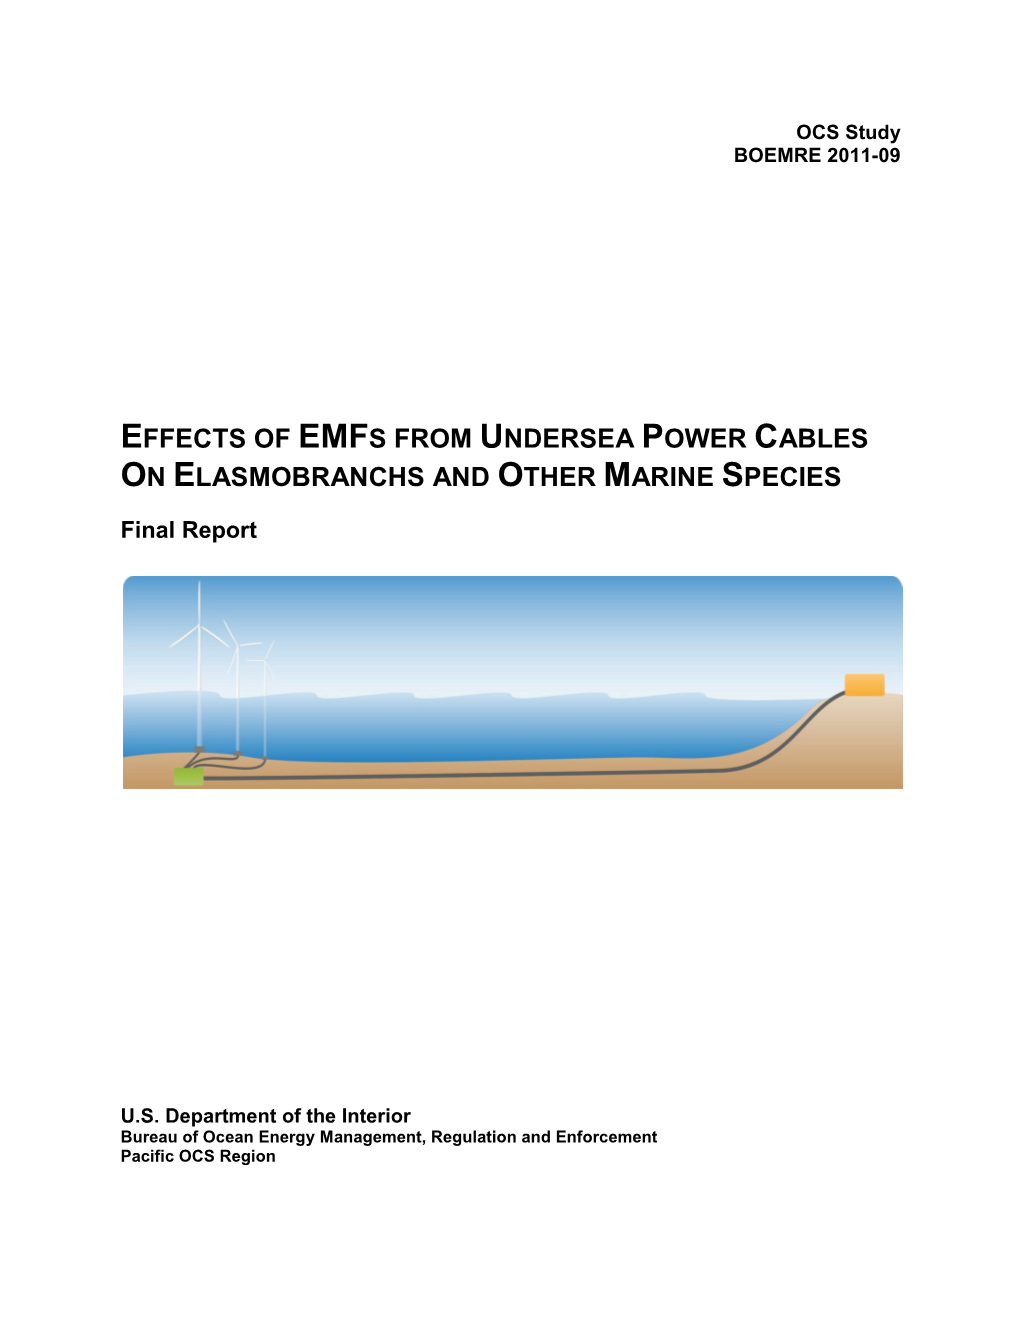 Effects of Emfs from Underwater Power Cables on Elasmobranchs